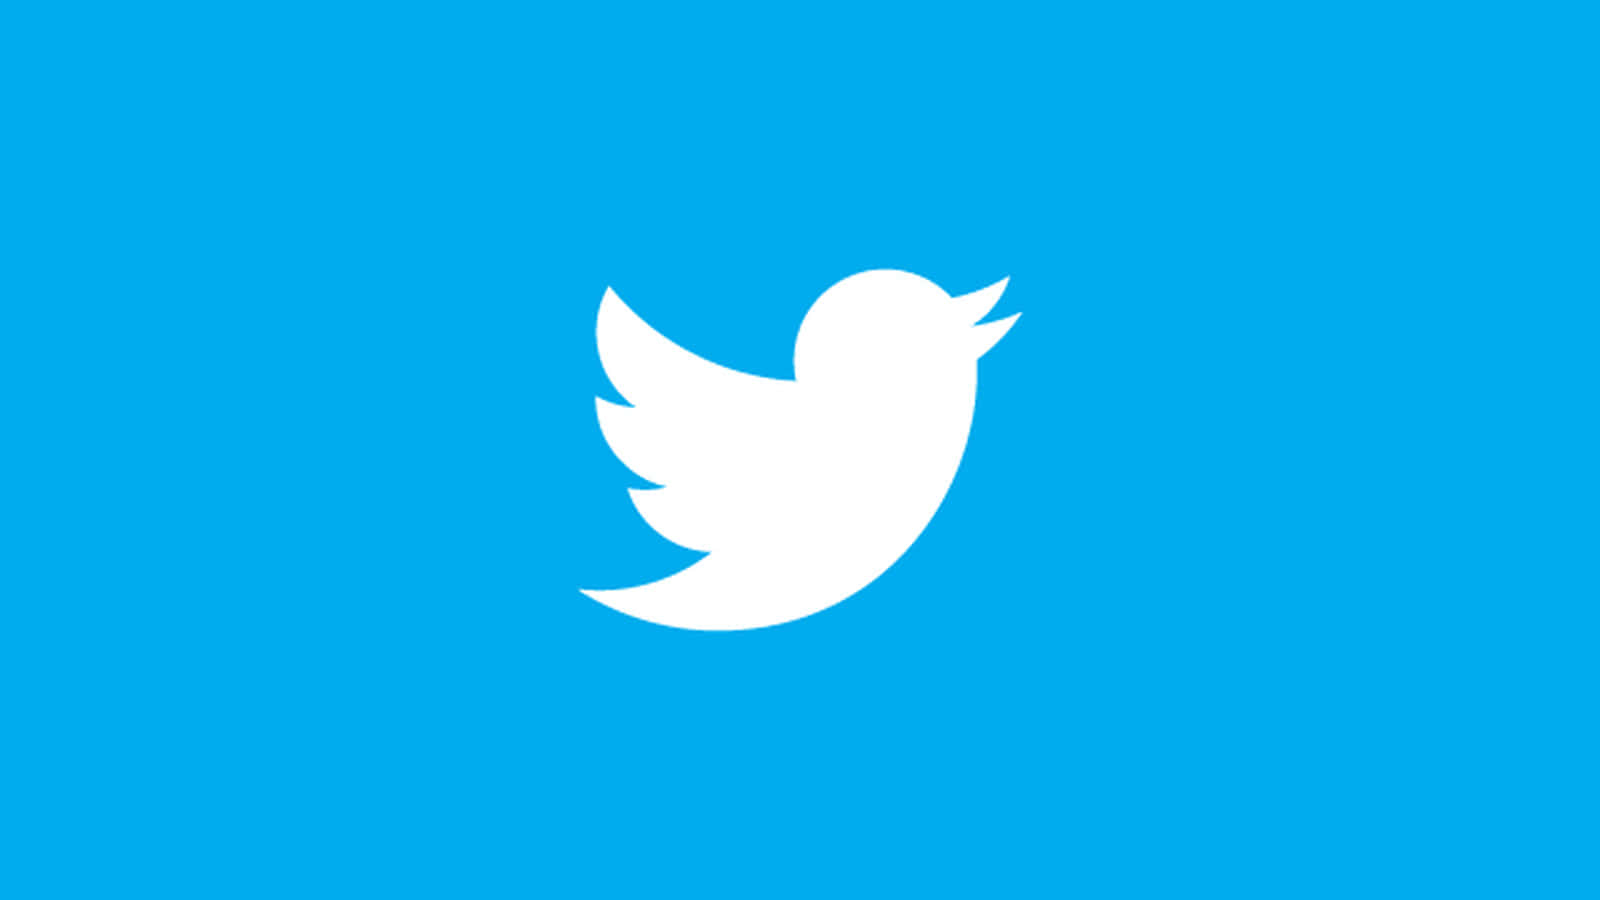 Twitter Logo On A Blue Background